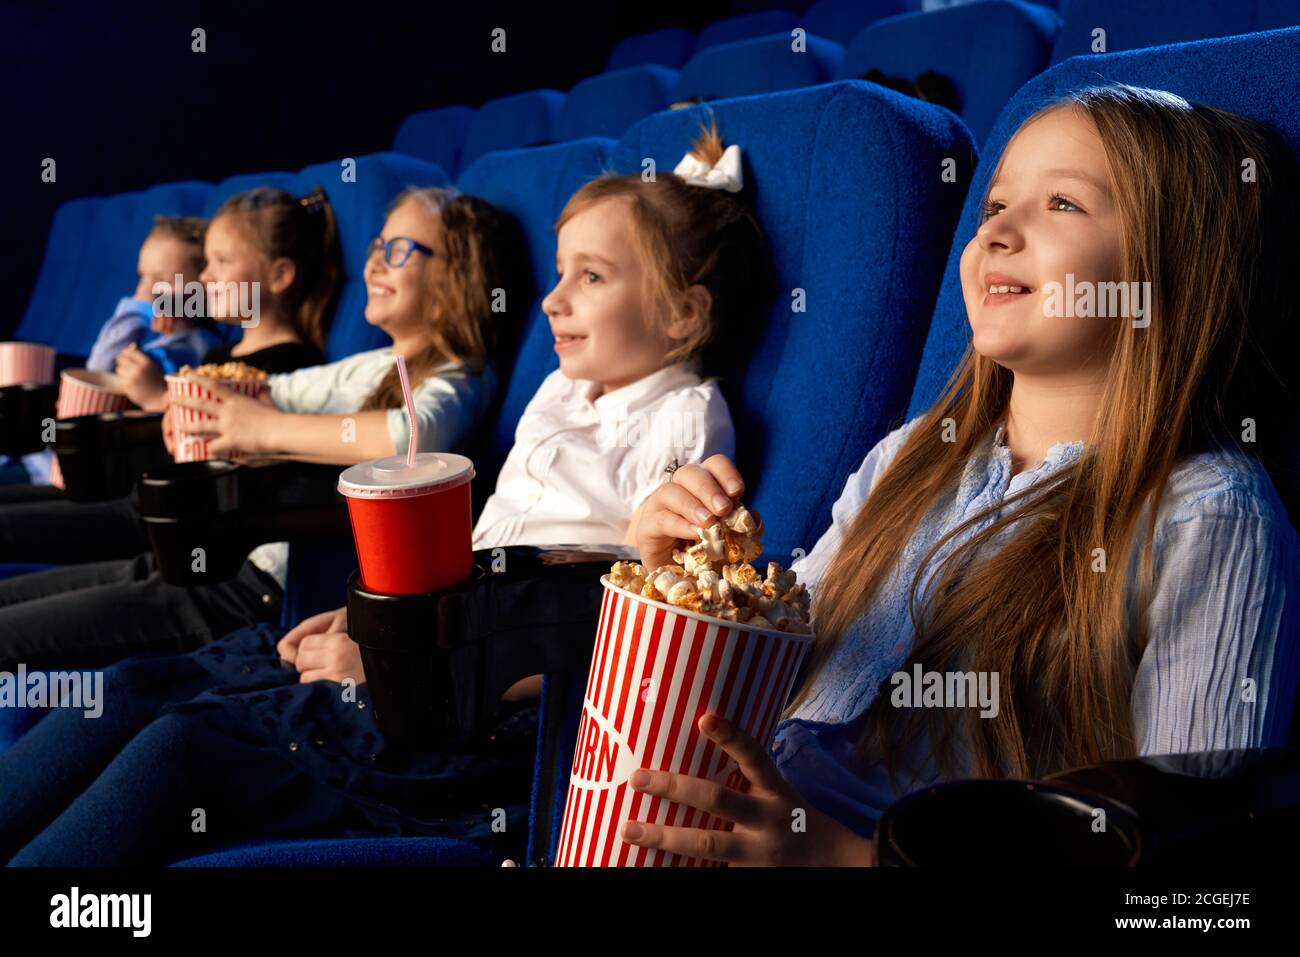 Selective focus of smiling little girl holding popcorn bucket, sitting with laughing friends in comfortable chairs in cinema. Children watching cartoon or movie, enjoying time. Entertainment concept. Stock Photo